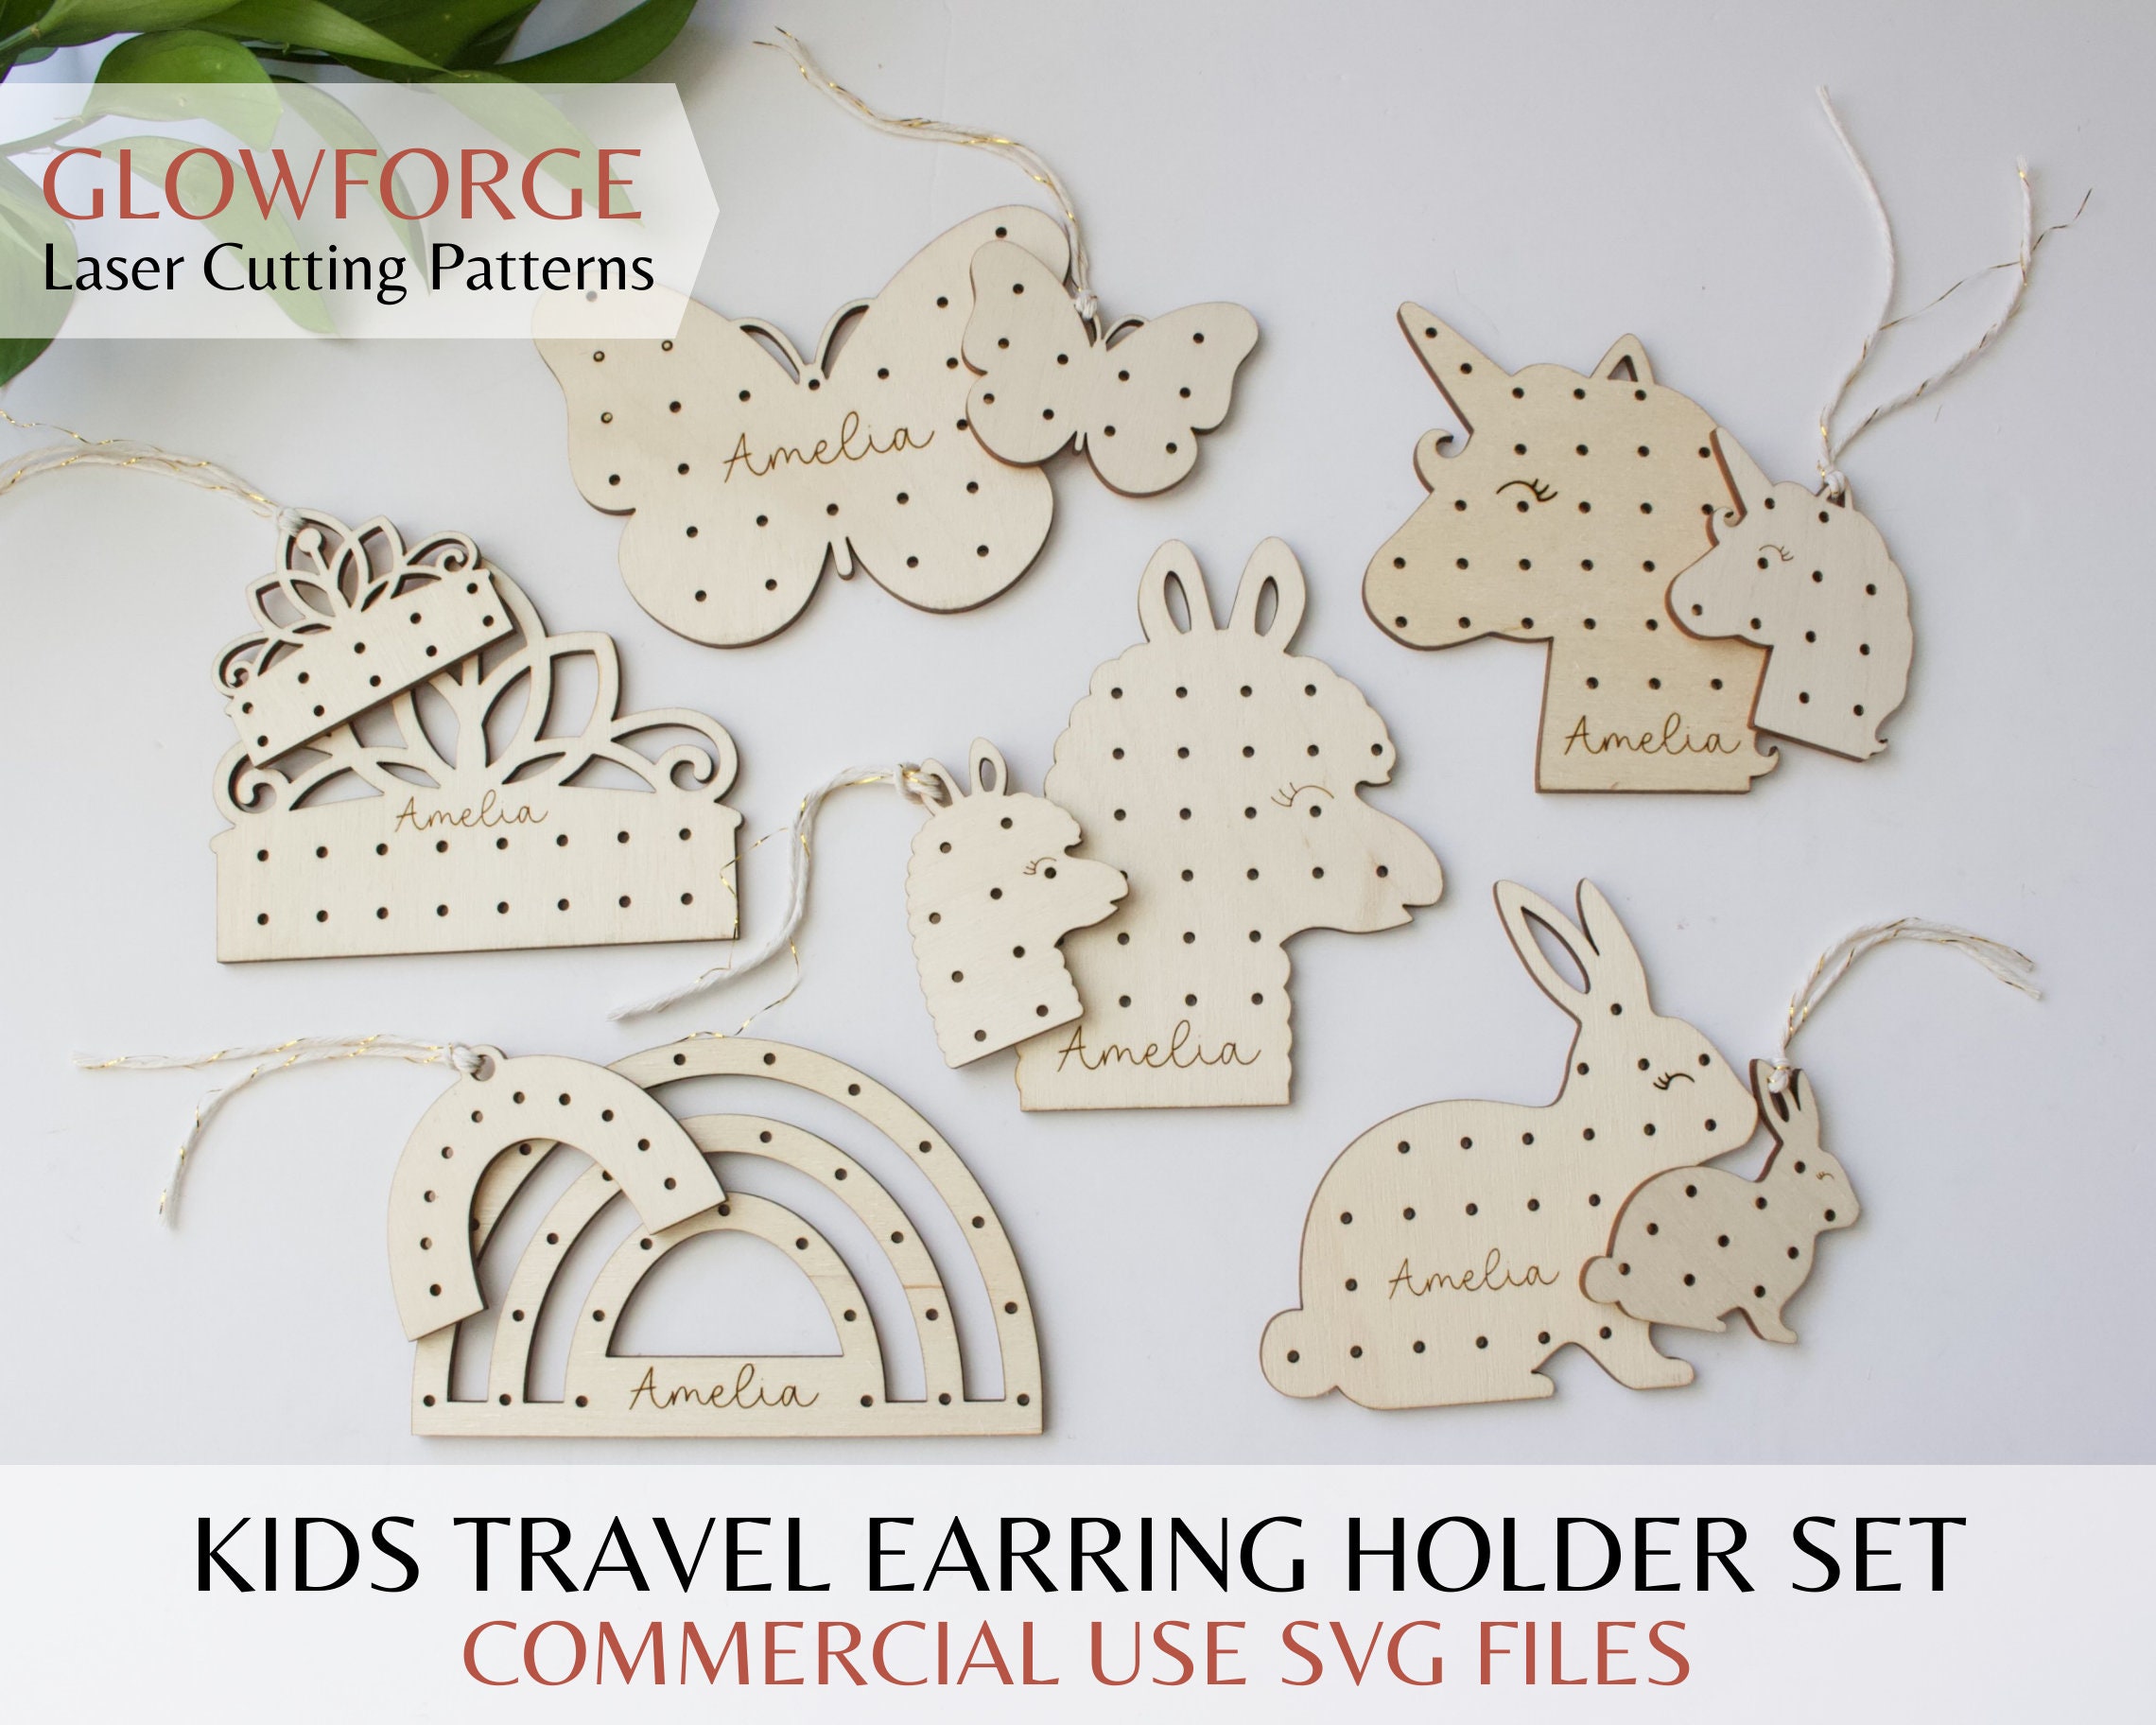 Travel Earring Holders Set of SVG Laser Cut Files for Glowforge, Stud  Earring Holder, Minimalist Jewelry Display Stands for Earrings, Boho 